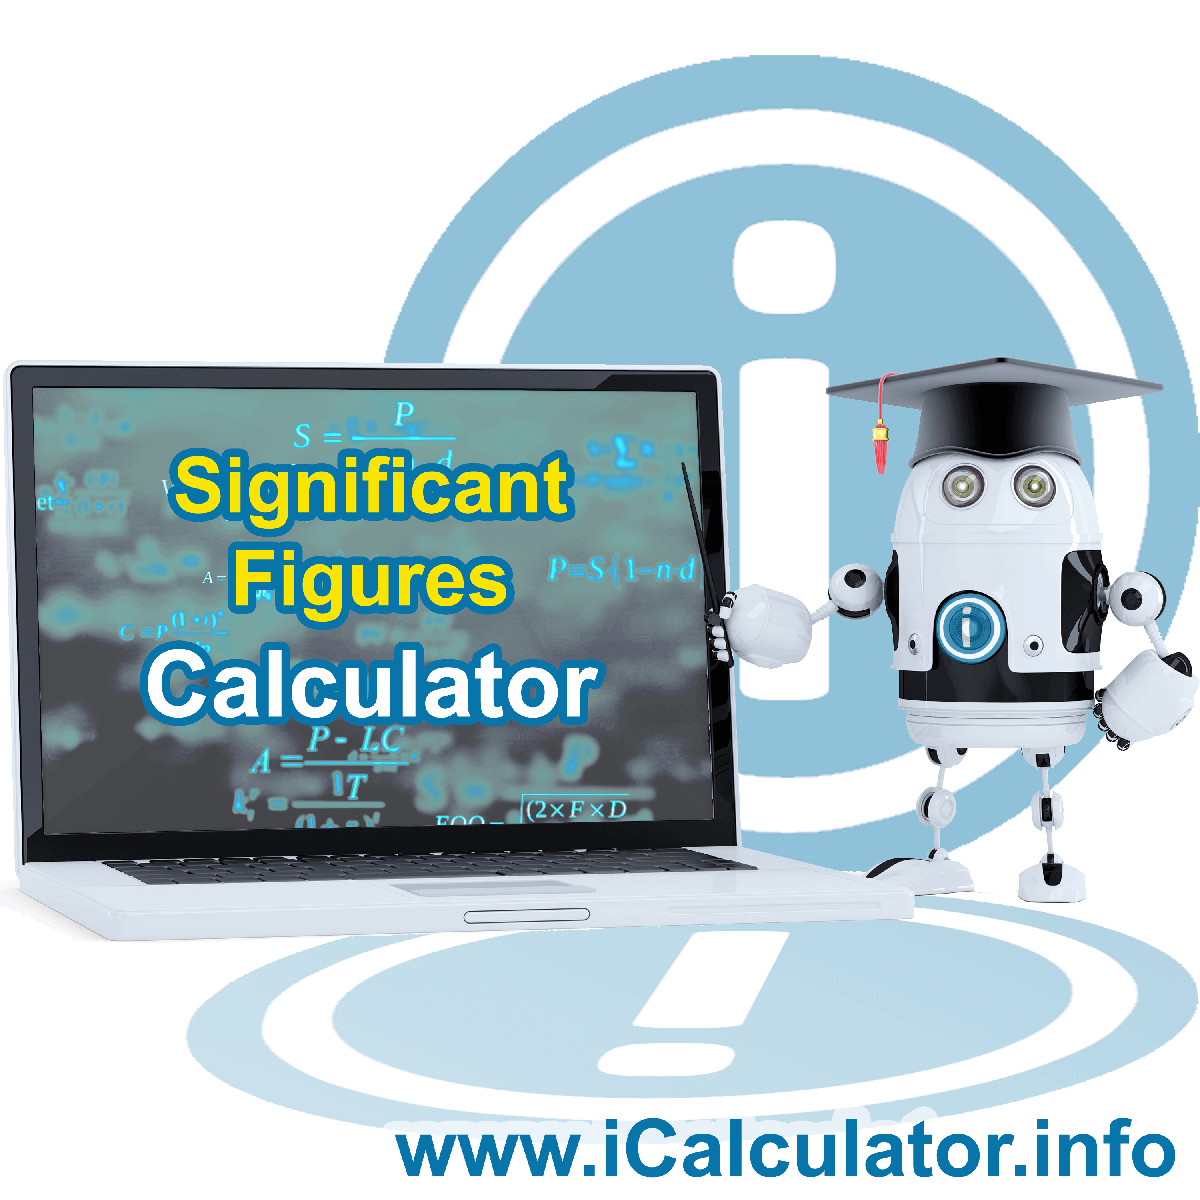 The Sig Fig Calculator by iCalculator, also known as a Significant Figure Calculator, is a good calculator for calculating a range of sig figures for math, physics, engineering, chemistry, and advanced math functions. A good online calculator with supporting sig figures formula and guide to sig figures.